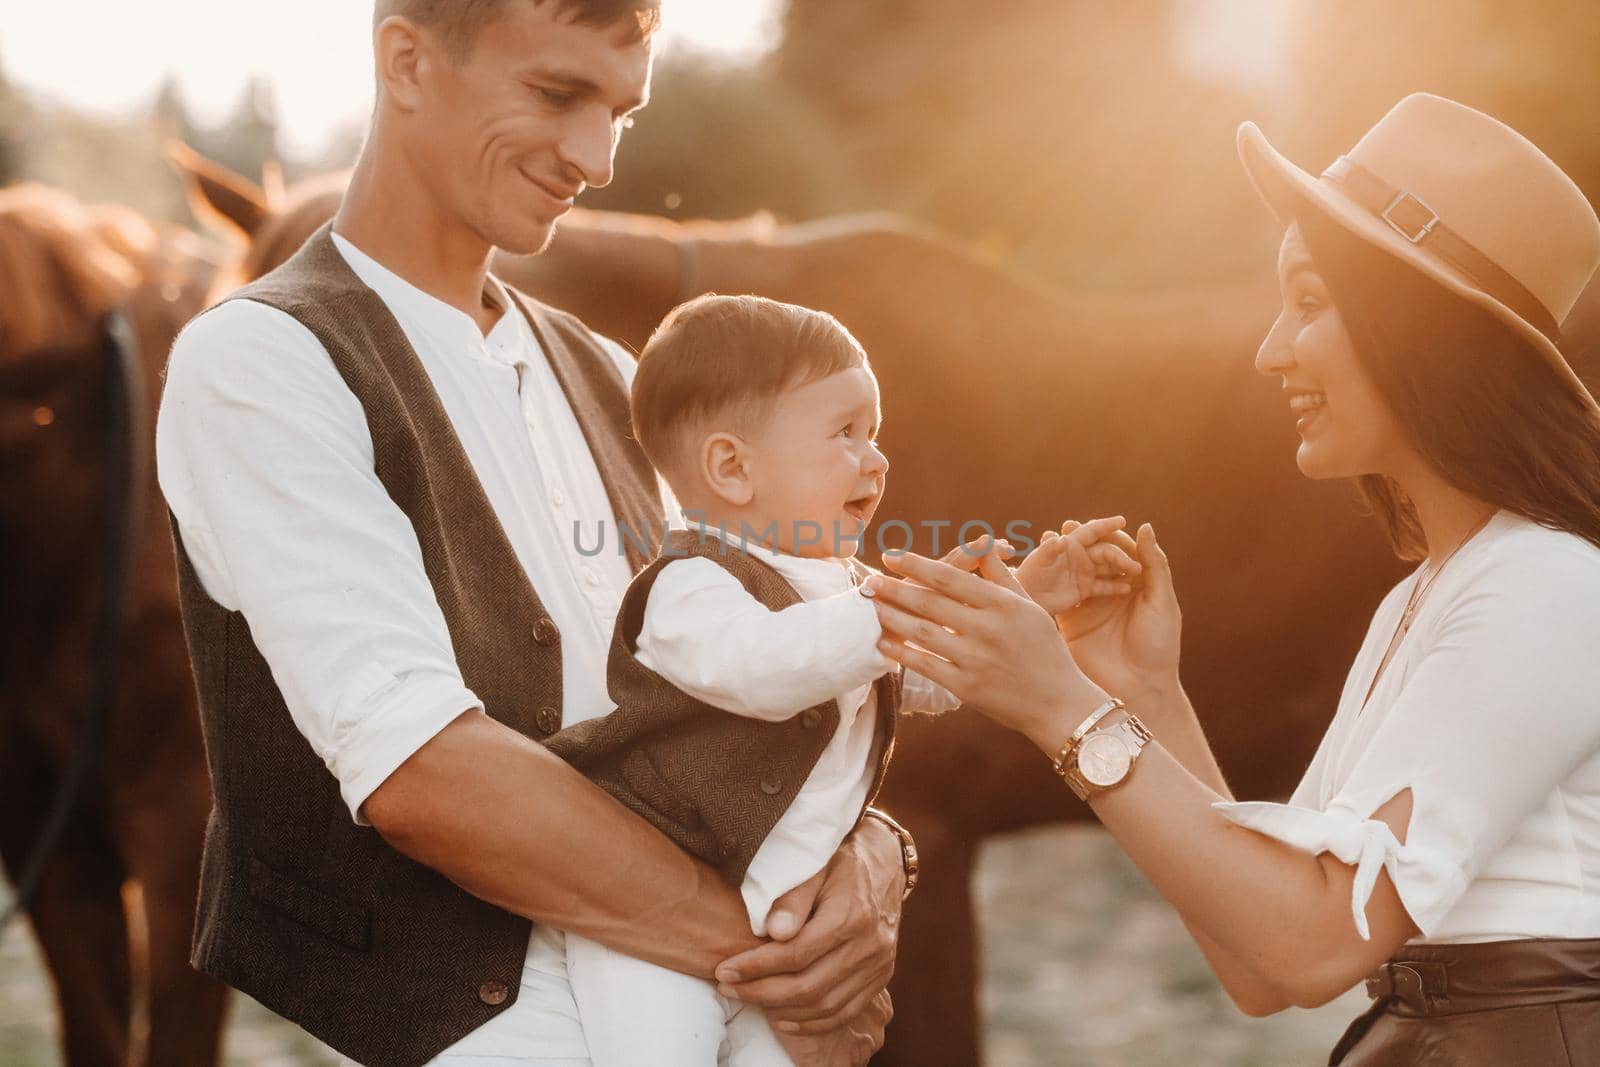 A family in white clothes with their son walking with two beautiful horses in nature. A stylish couple with a child are photographed with horses at sunset.